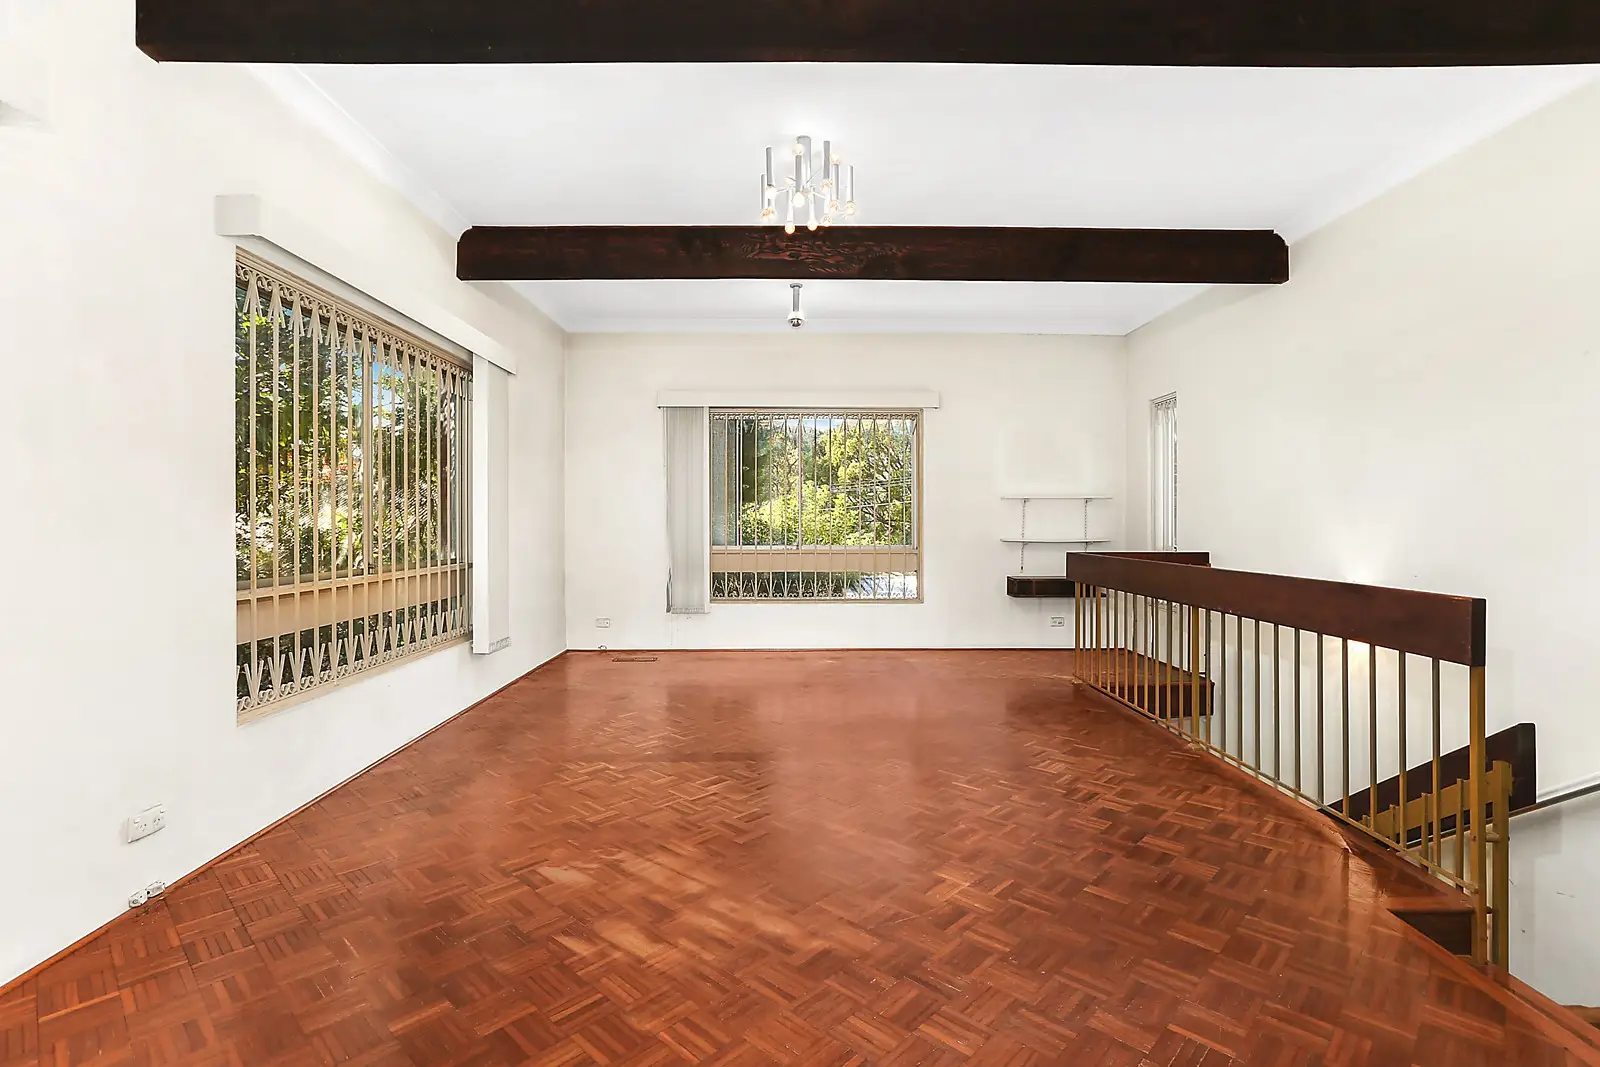 Photo #2: 6 Russell Street, Vaucluse - Sold by Sydney Sotheby's International Realty